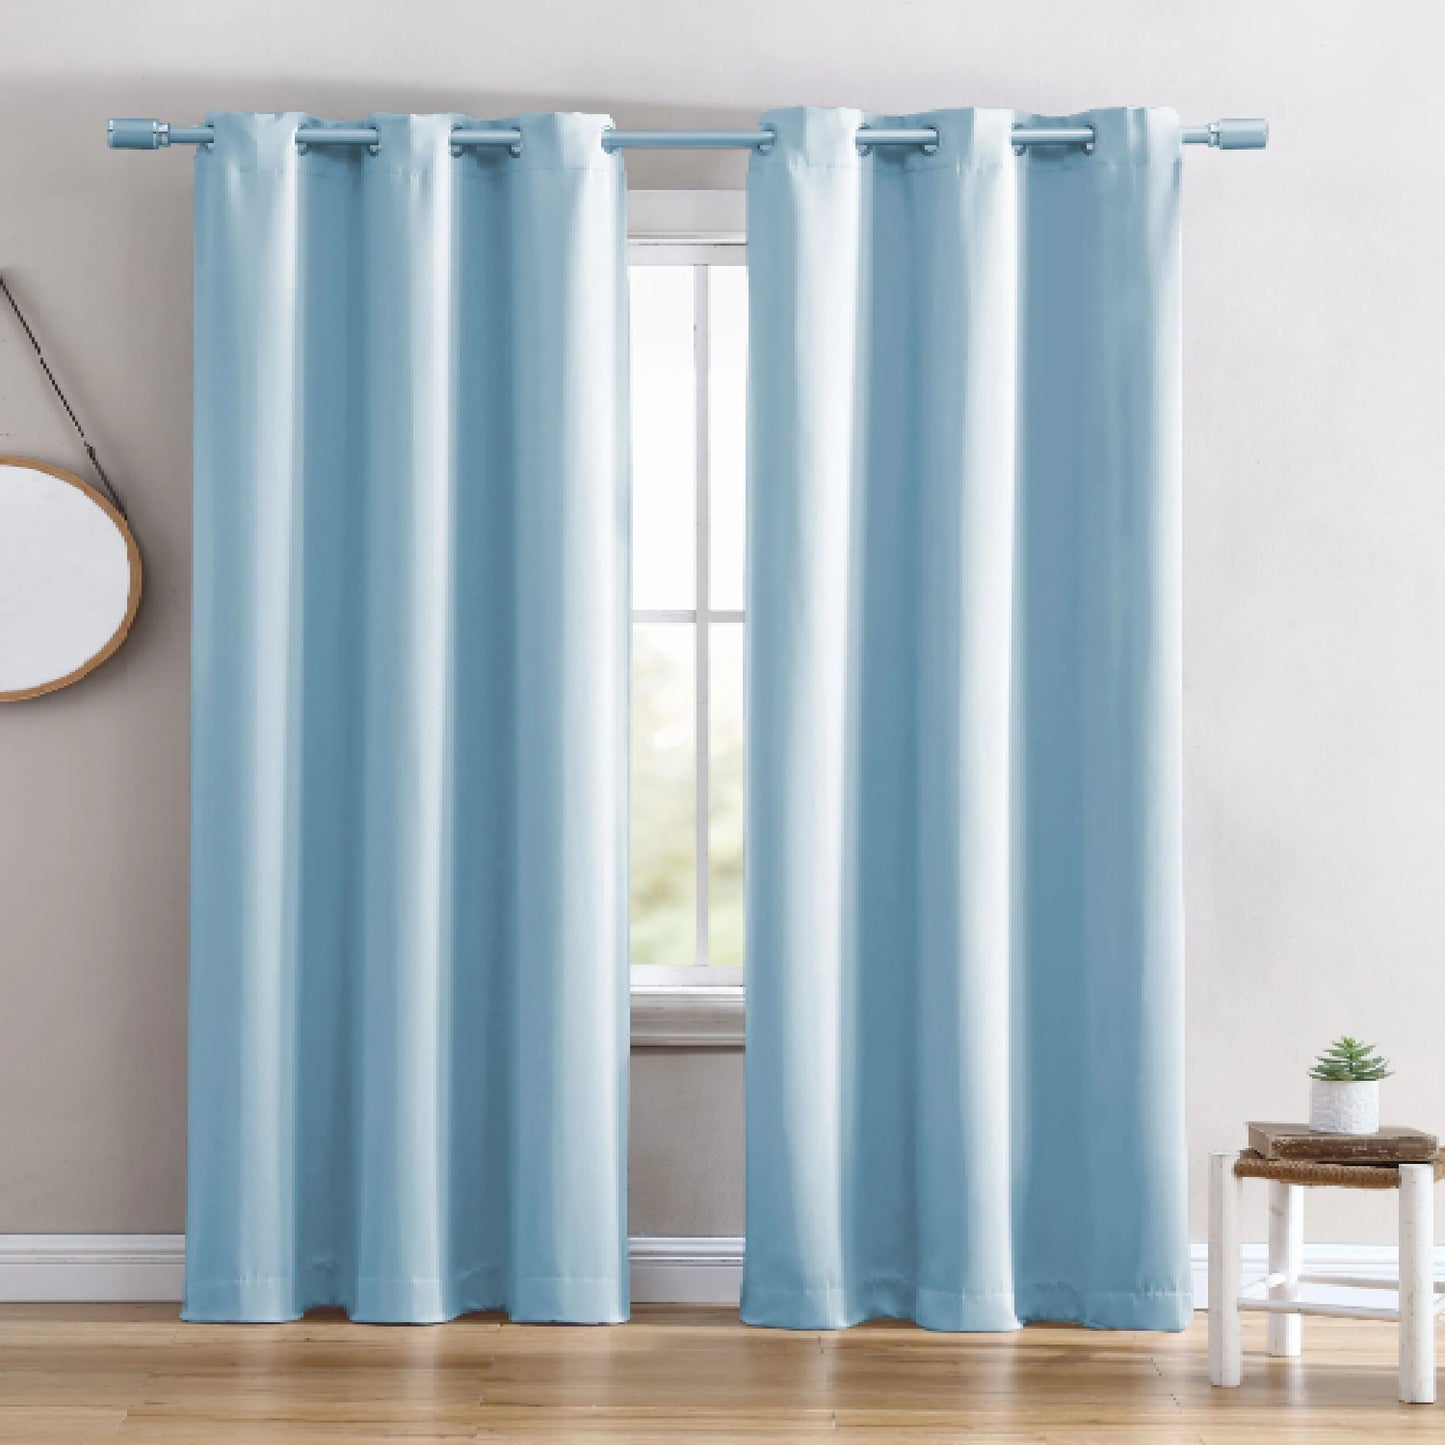 Ring Top Solid Blackout Thermal Grommet Single Curtain Panel Baby blue